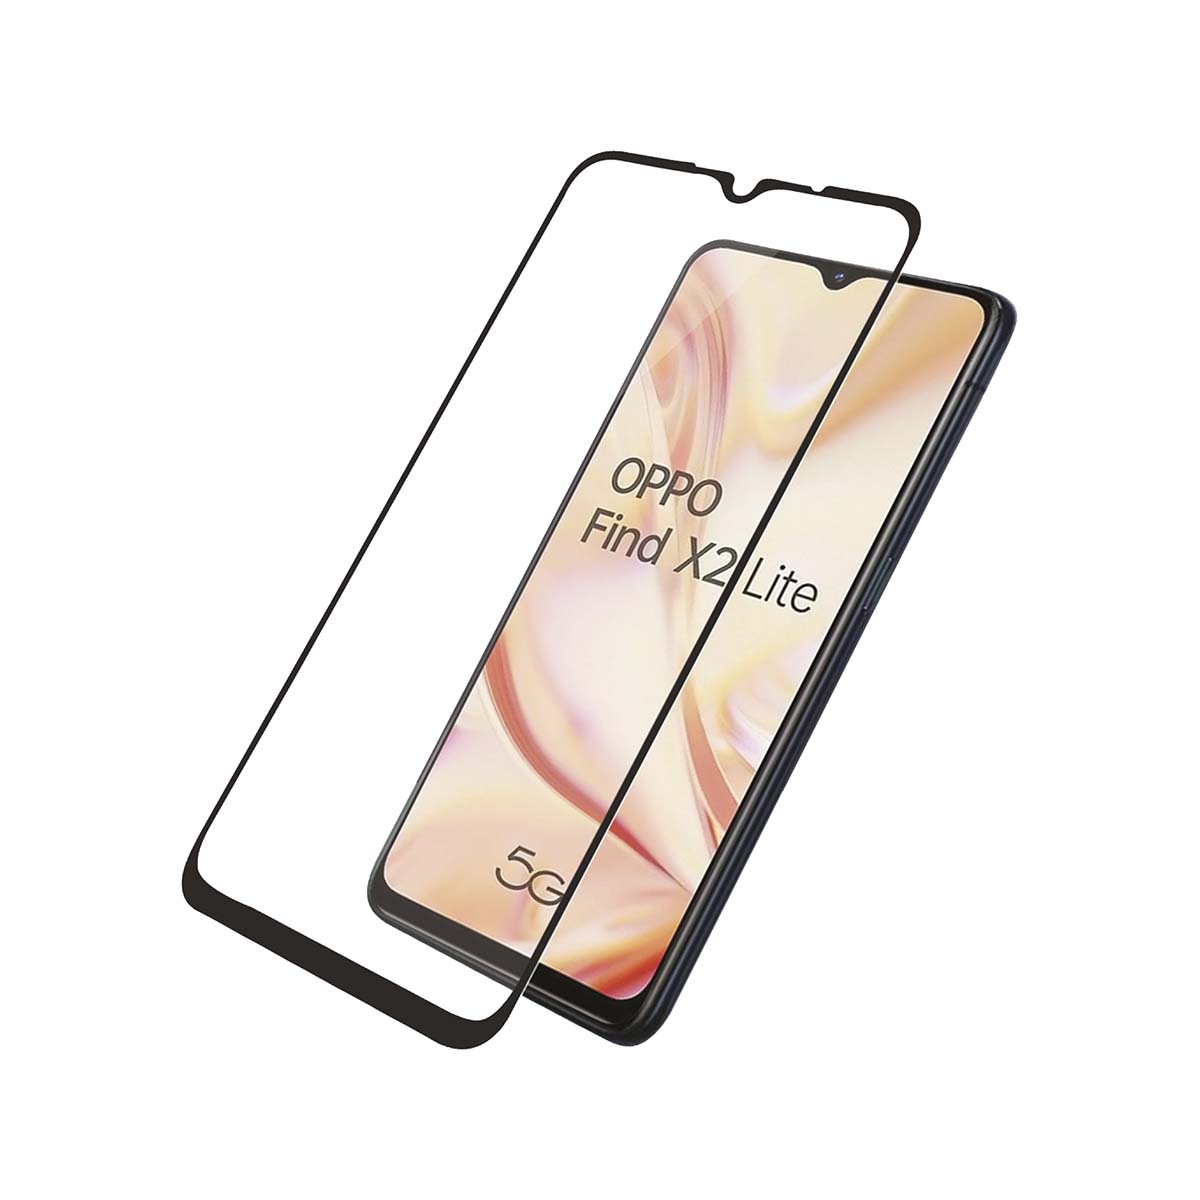 PanzerGlass Edge to Edge Screen Protector for Oppo Find X2 lite/A91 - Black